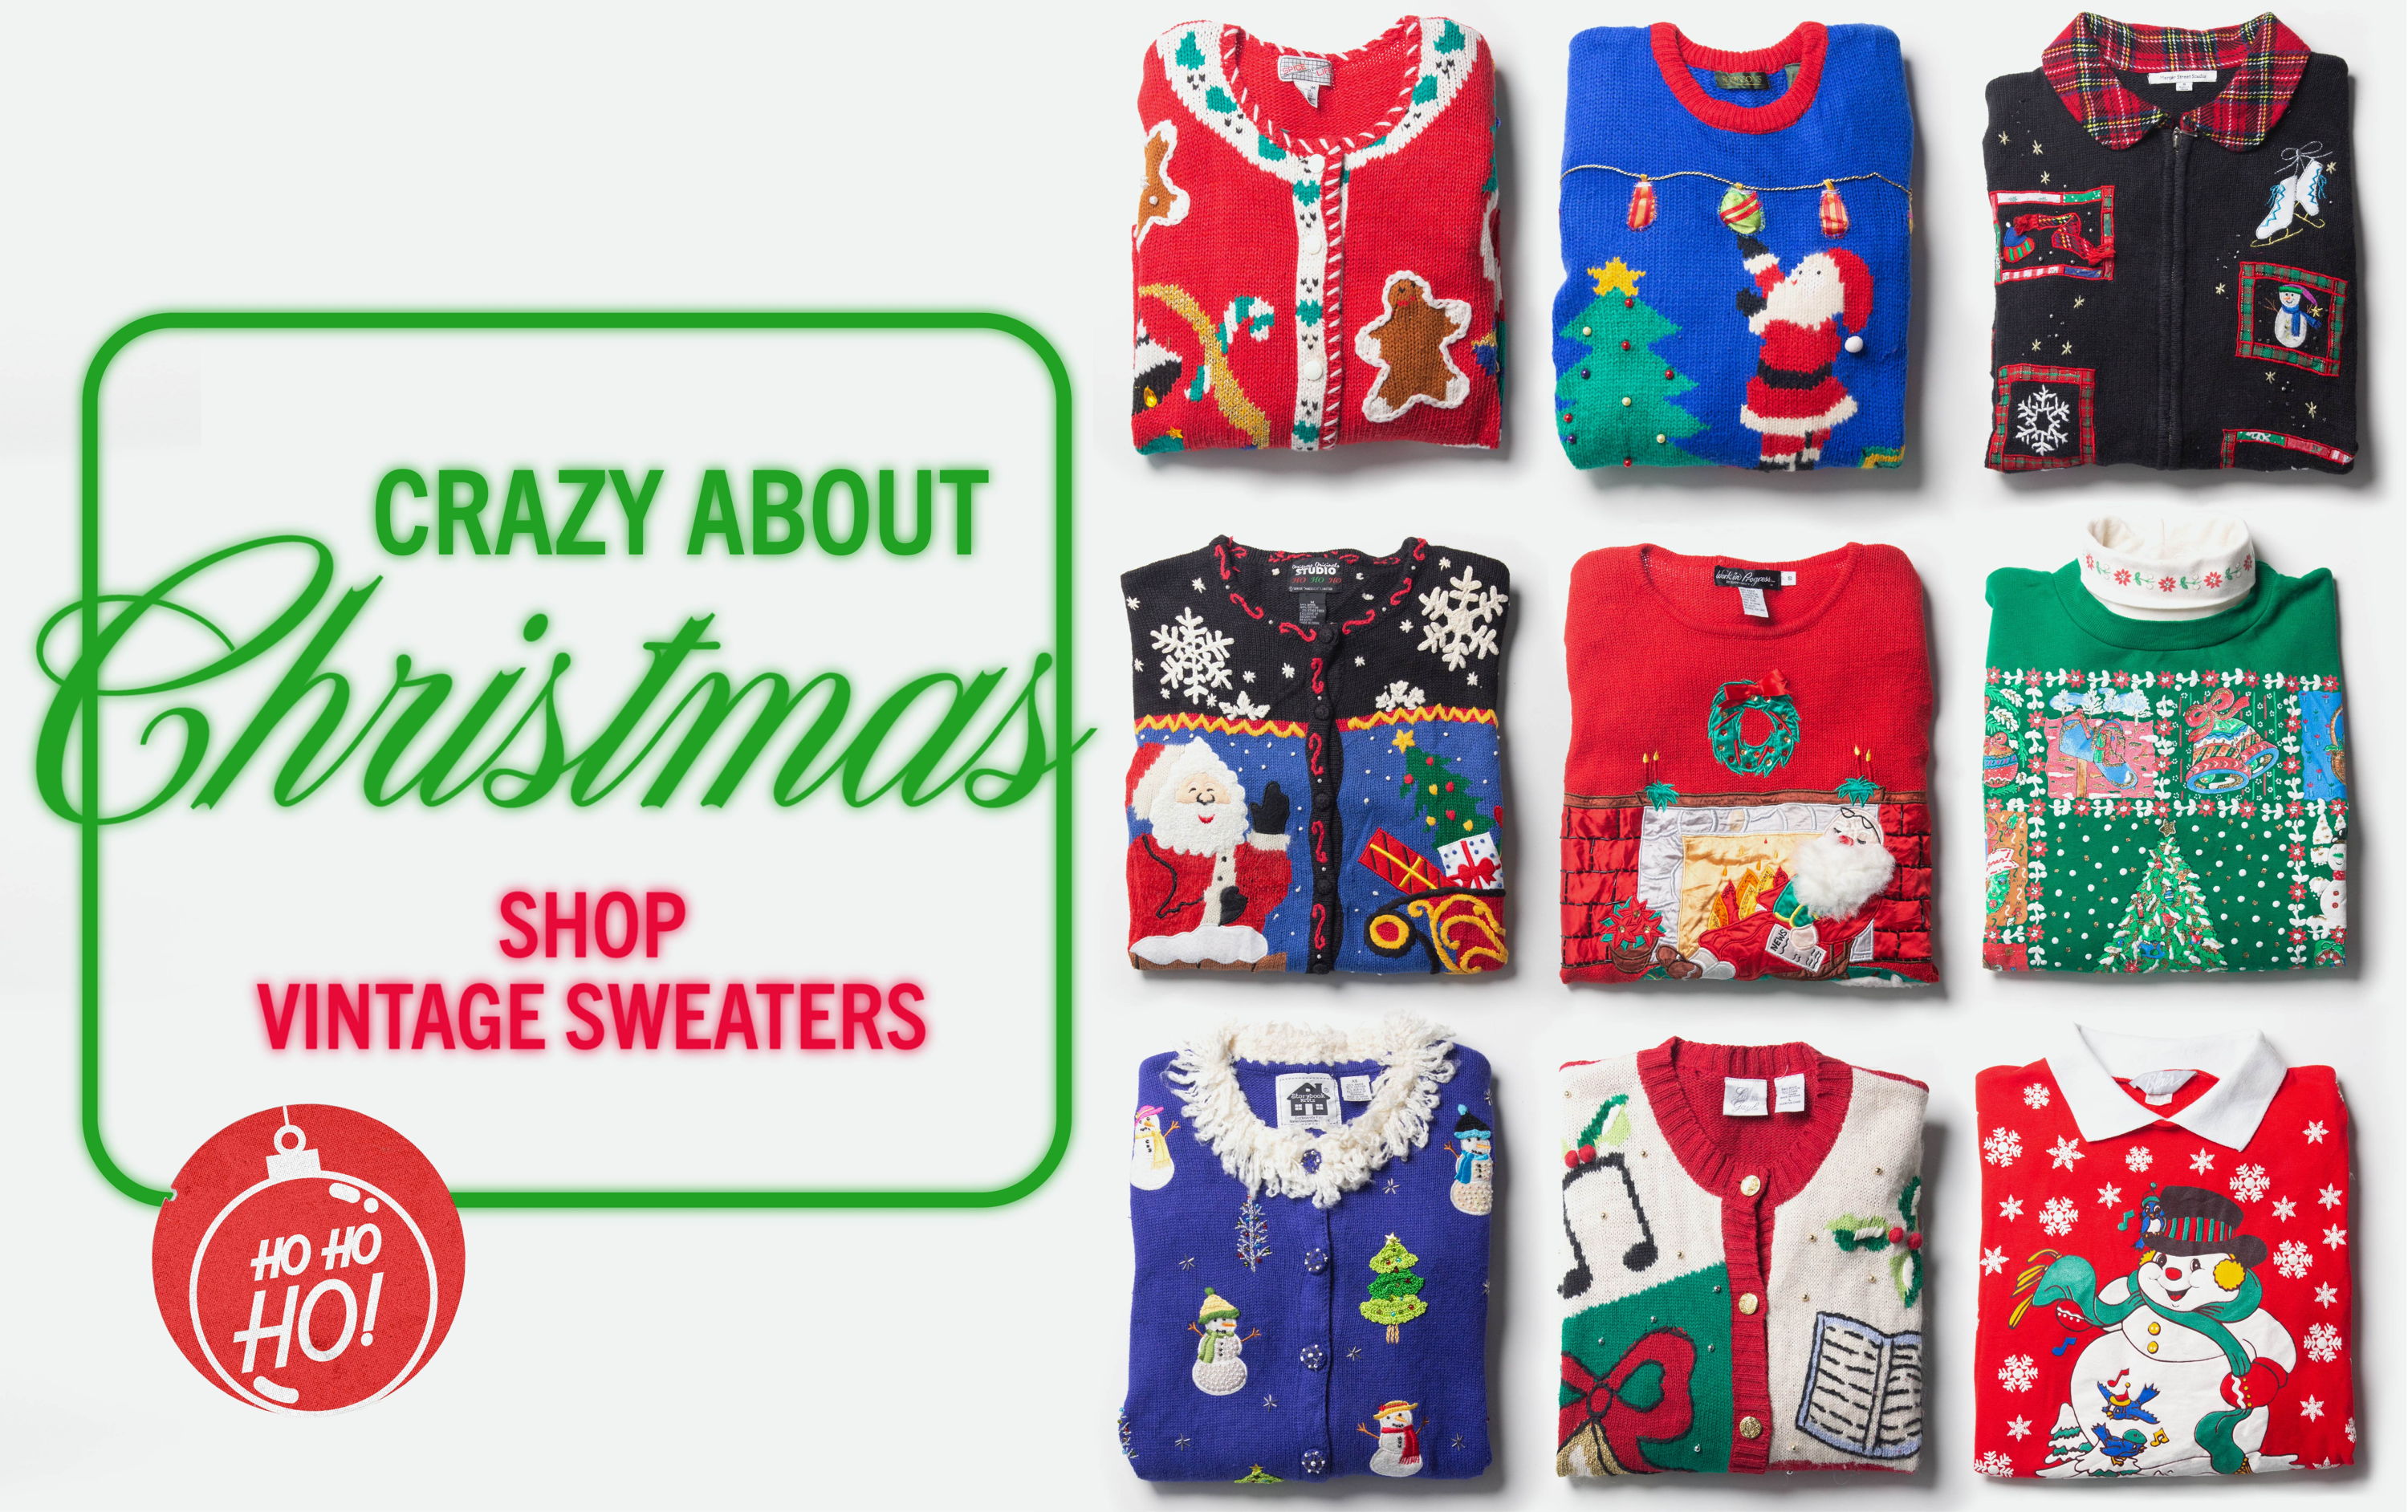 Crazy About Christmas. Shop vintage sweaters